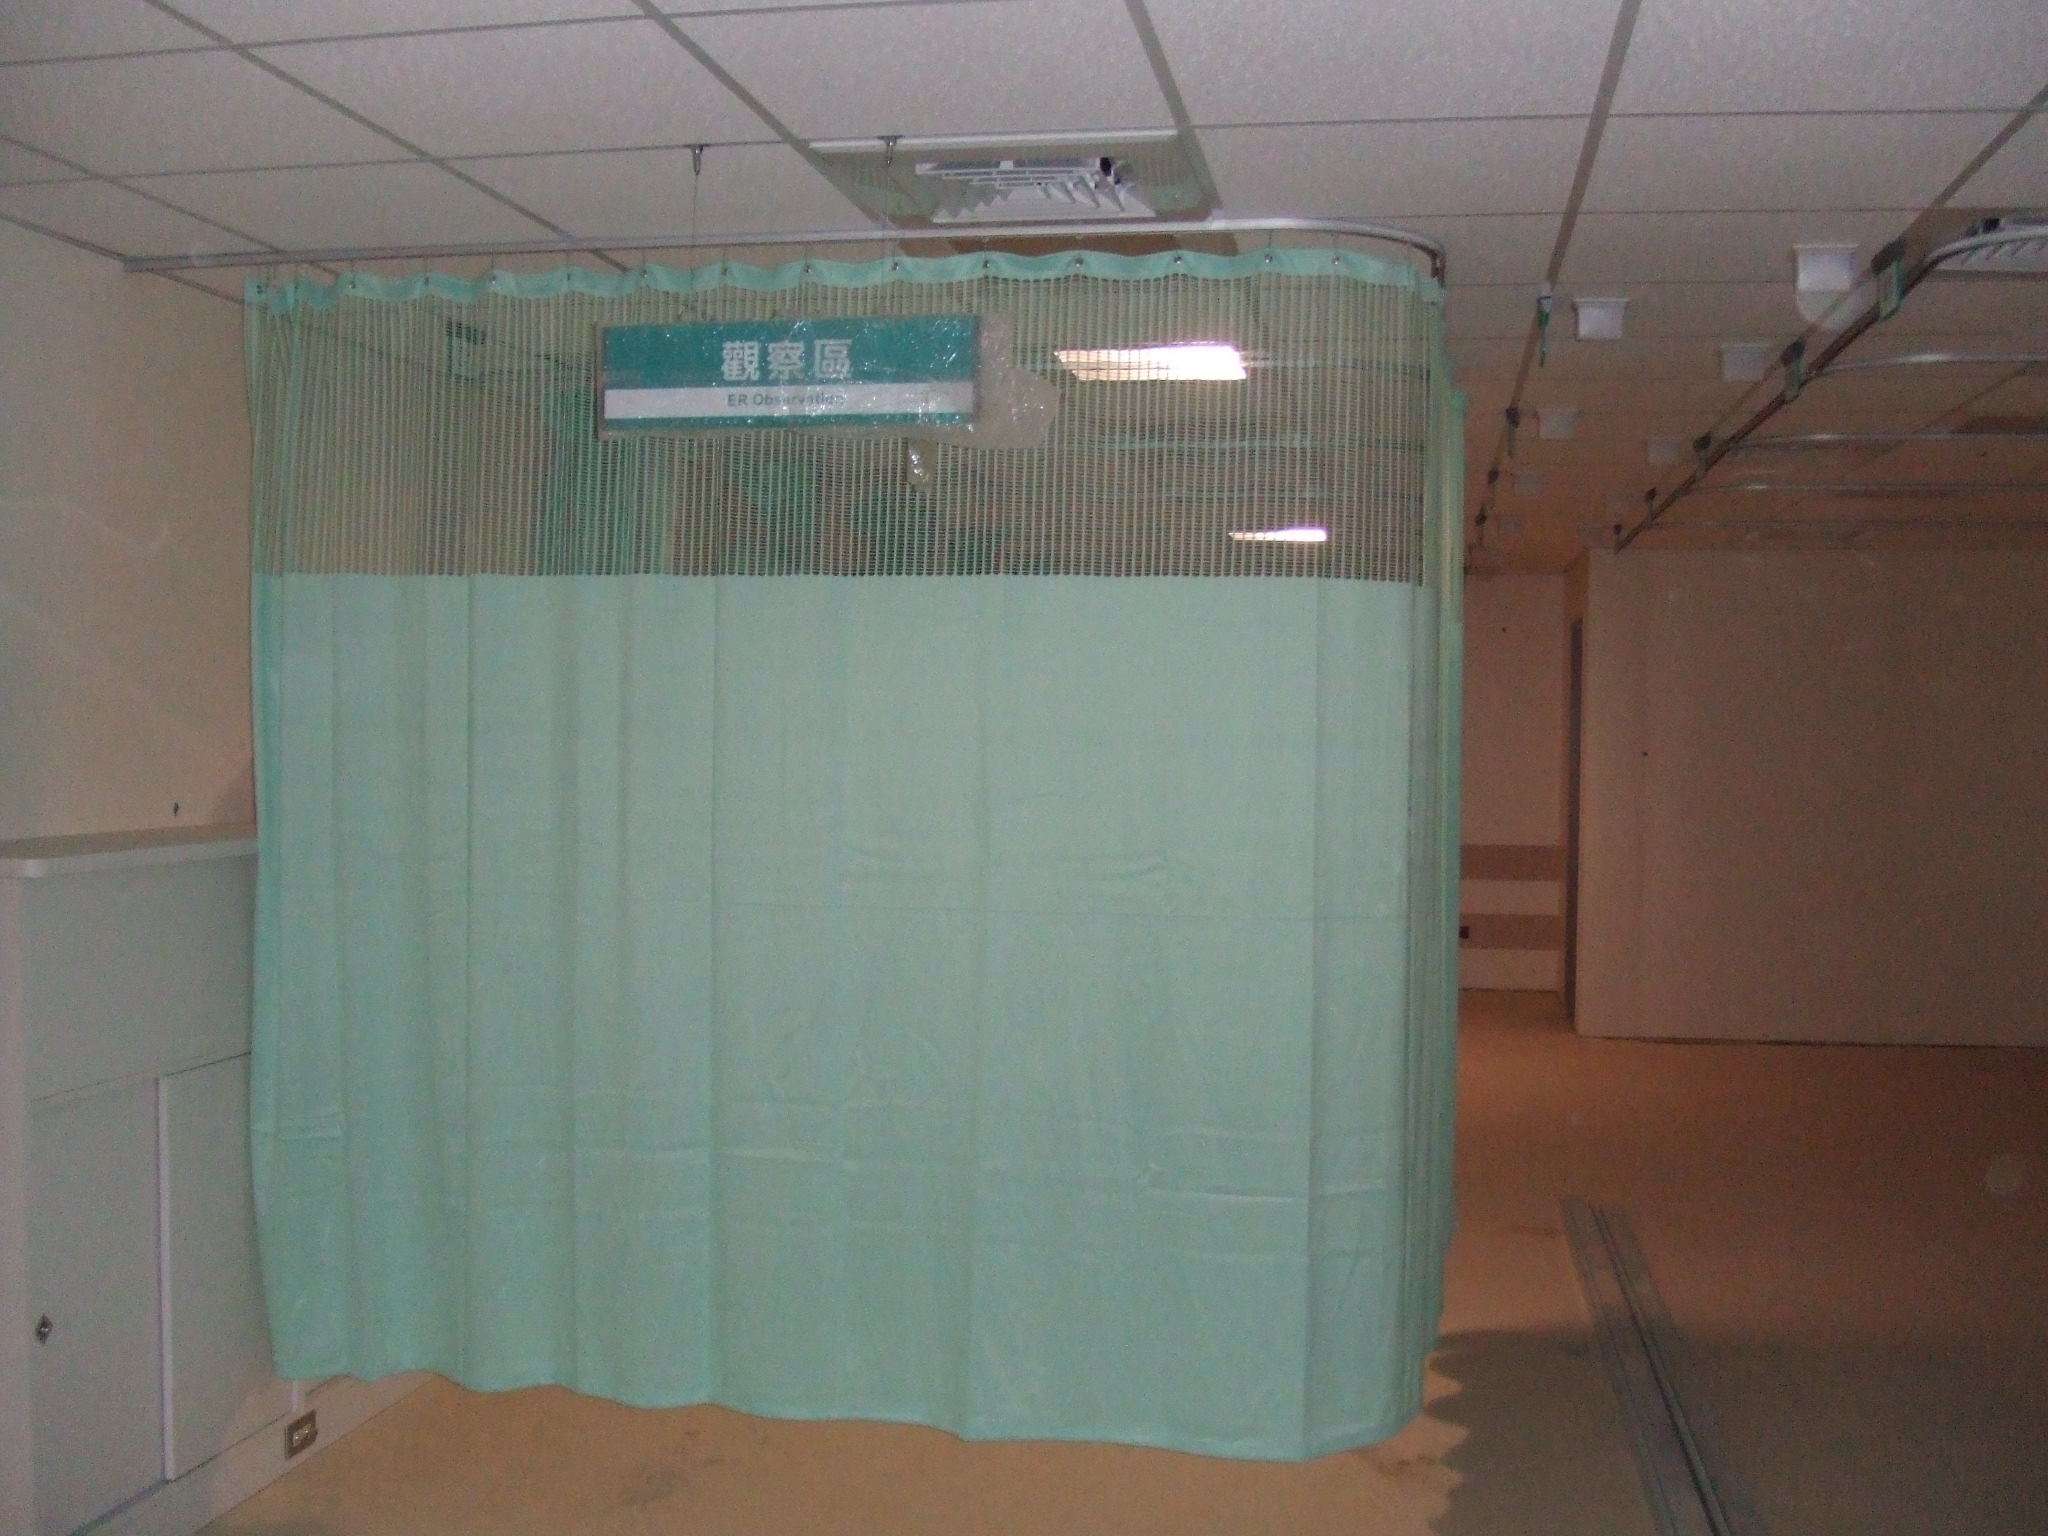 HOSPITAL ROOM CURTAINS MAY HIDE DANGEROUS BACTERIA | ABC7CHICAGO.COM